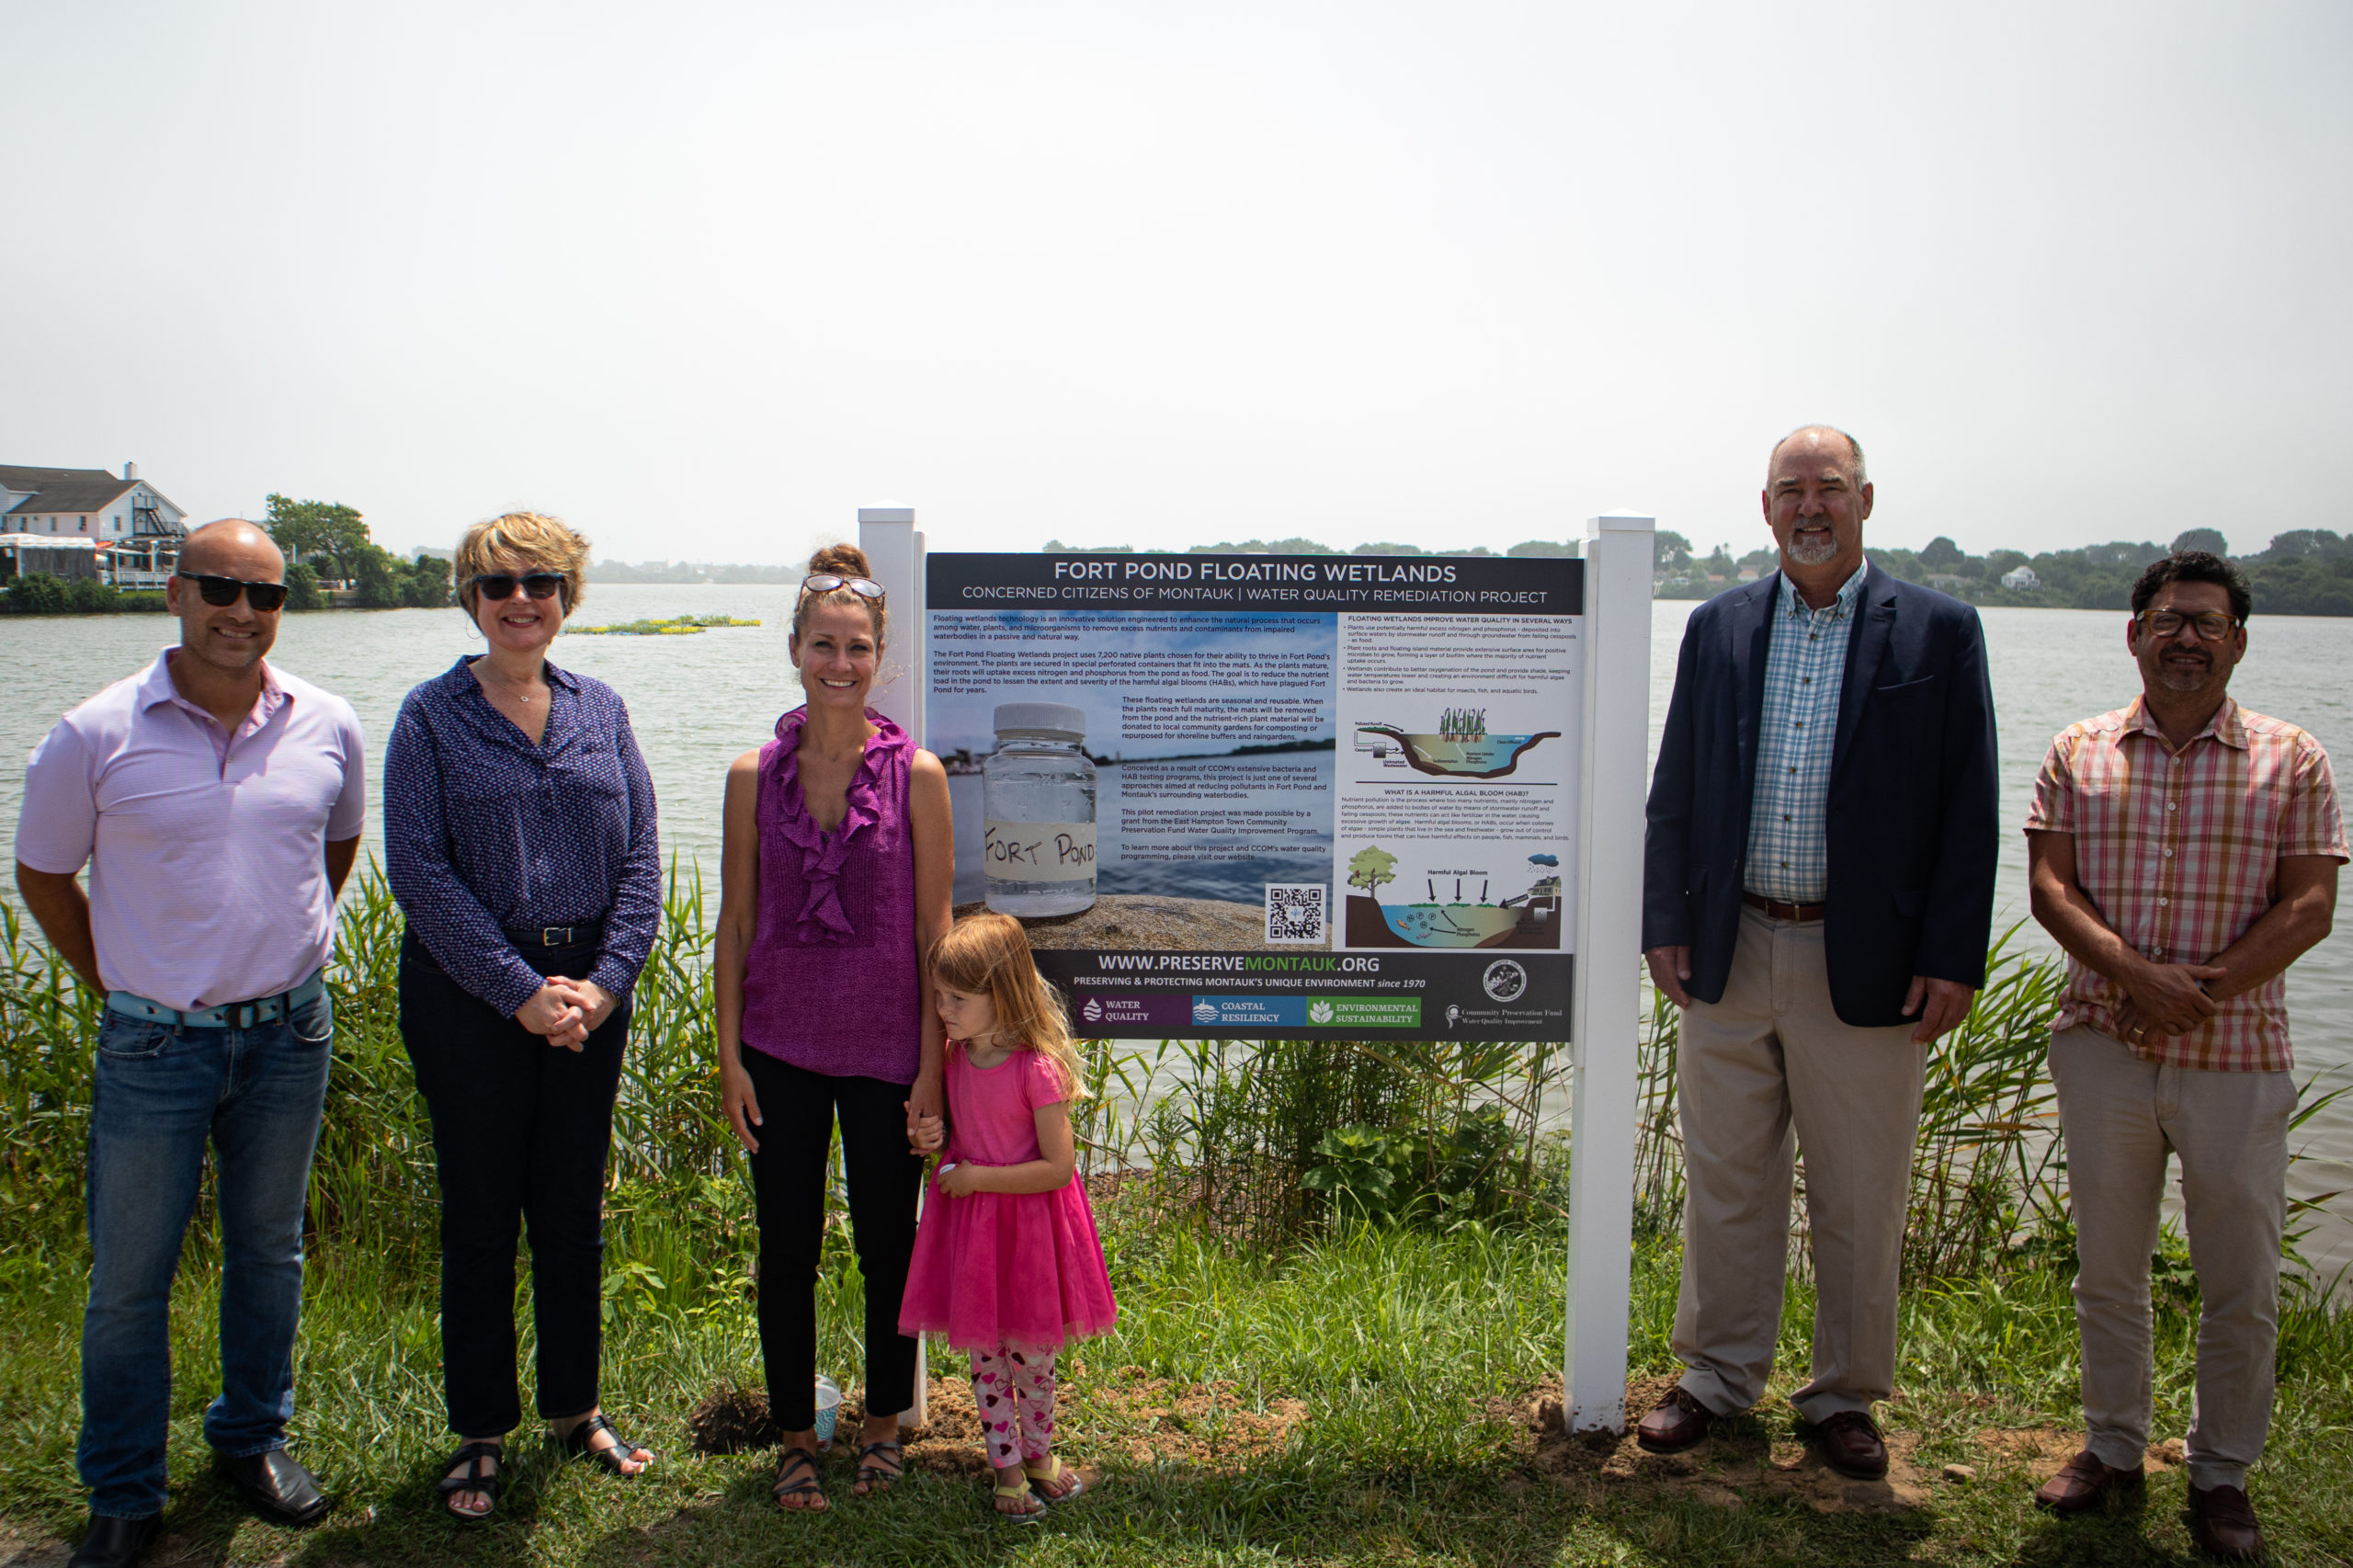 Board Member David Lys, Deputy Supervisor Kathee Burke-Gonzalez, CCOM President Laura Tooman (and her daughter), Supervisor Peter Van Scoyoc and CCOM Chairman David Freudenthal at an unveiling of new educational wetlands signs at Fort Pond earlier this month.